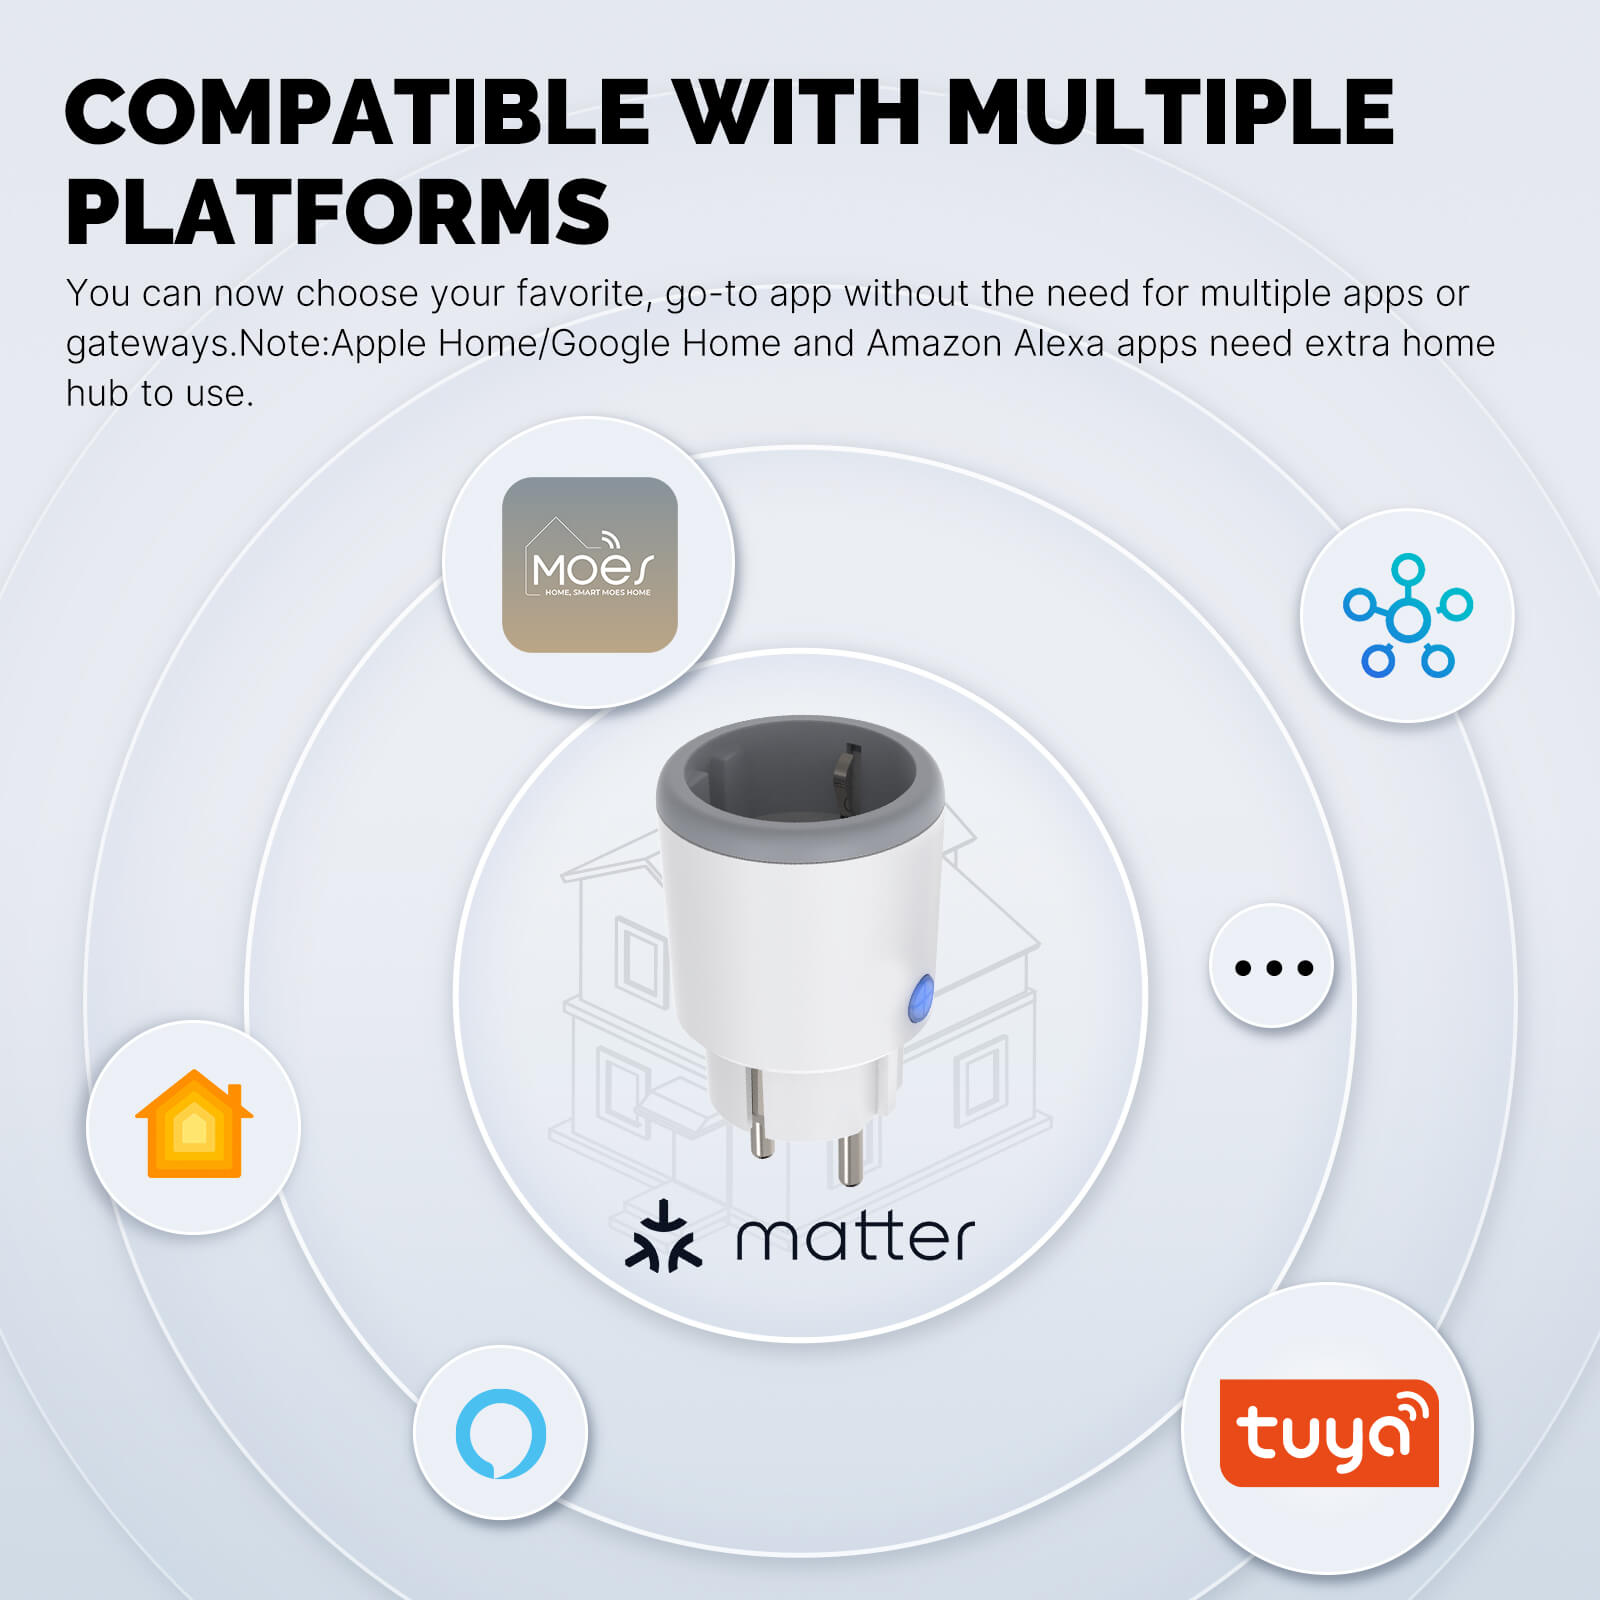 compatible with multiple platforms - MOES